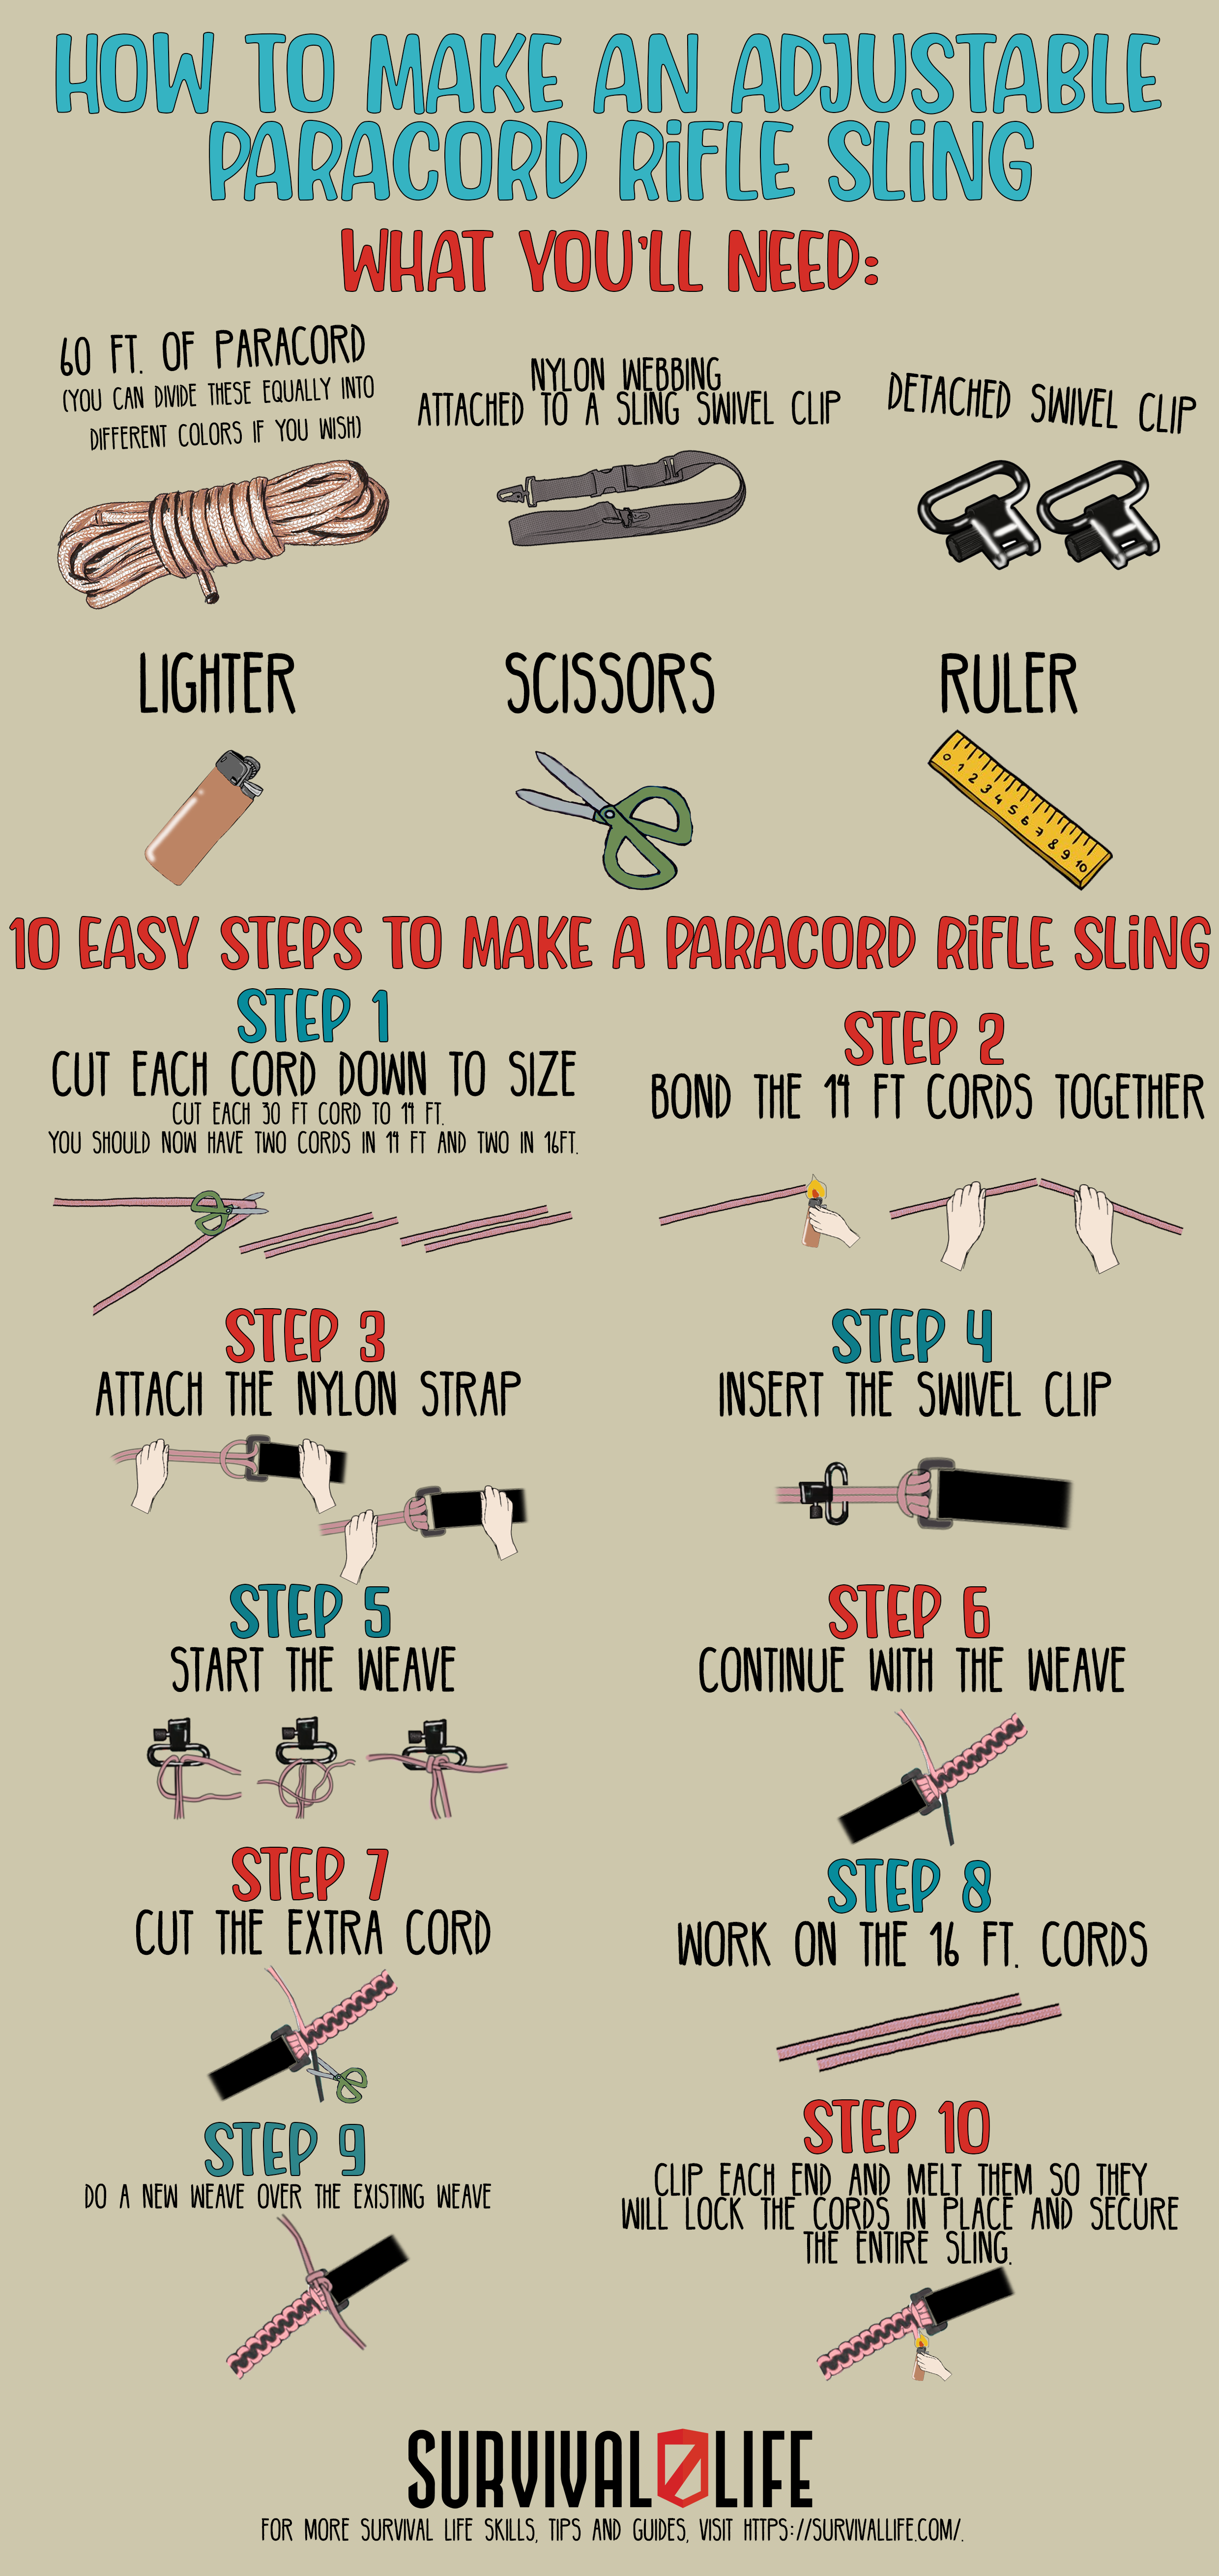 How to Make an Adjustable Paracord Rifle Sling